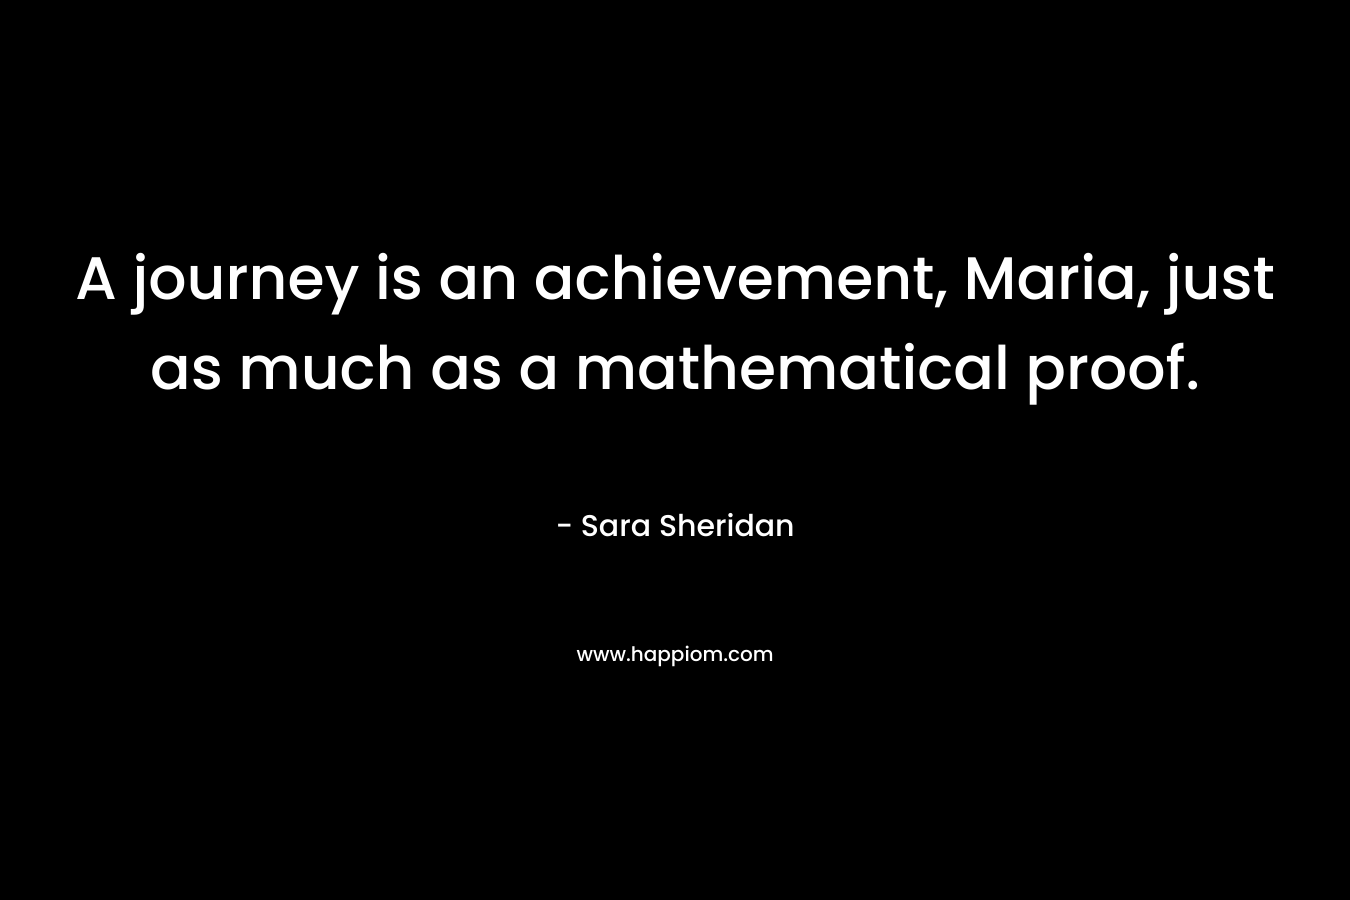 A journey is an achievement, Maria, just as much as a mathematical proof.